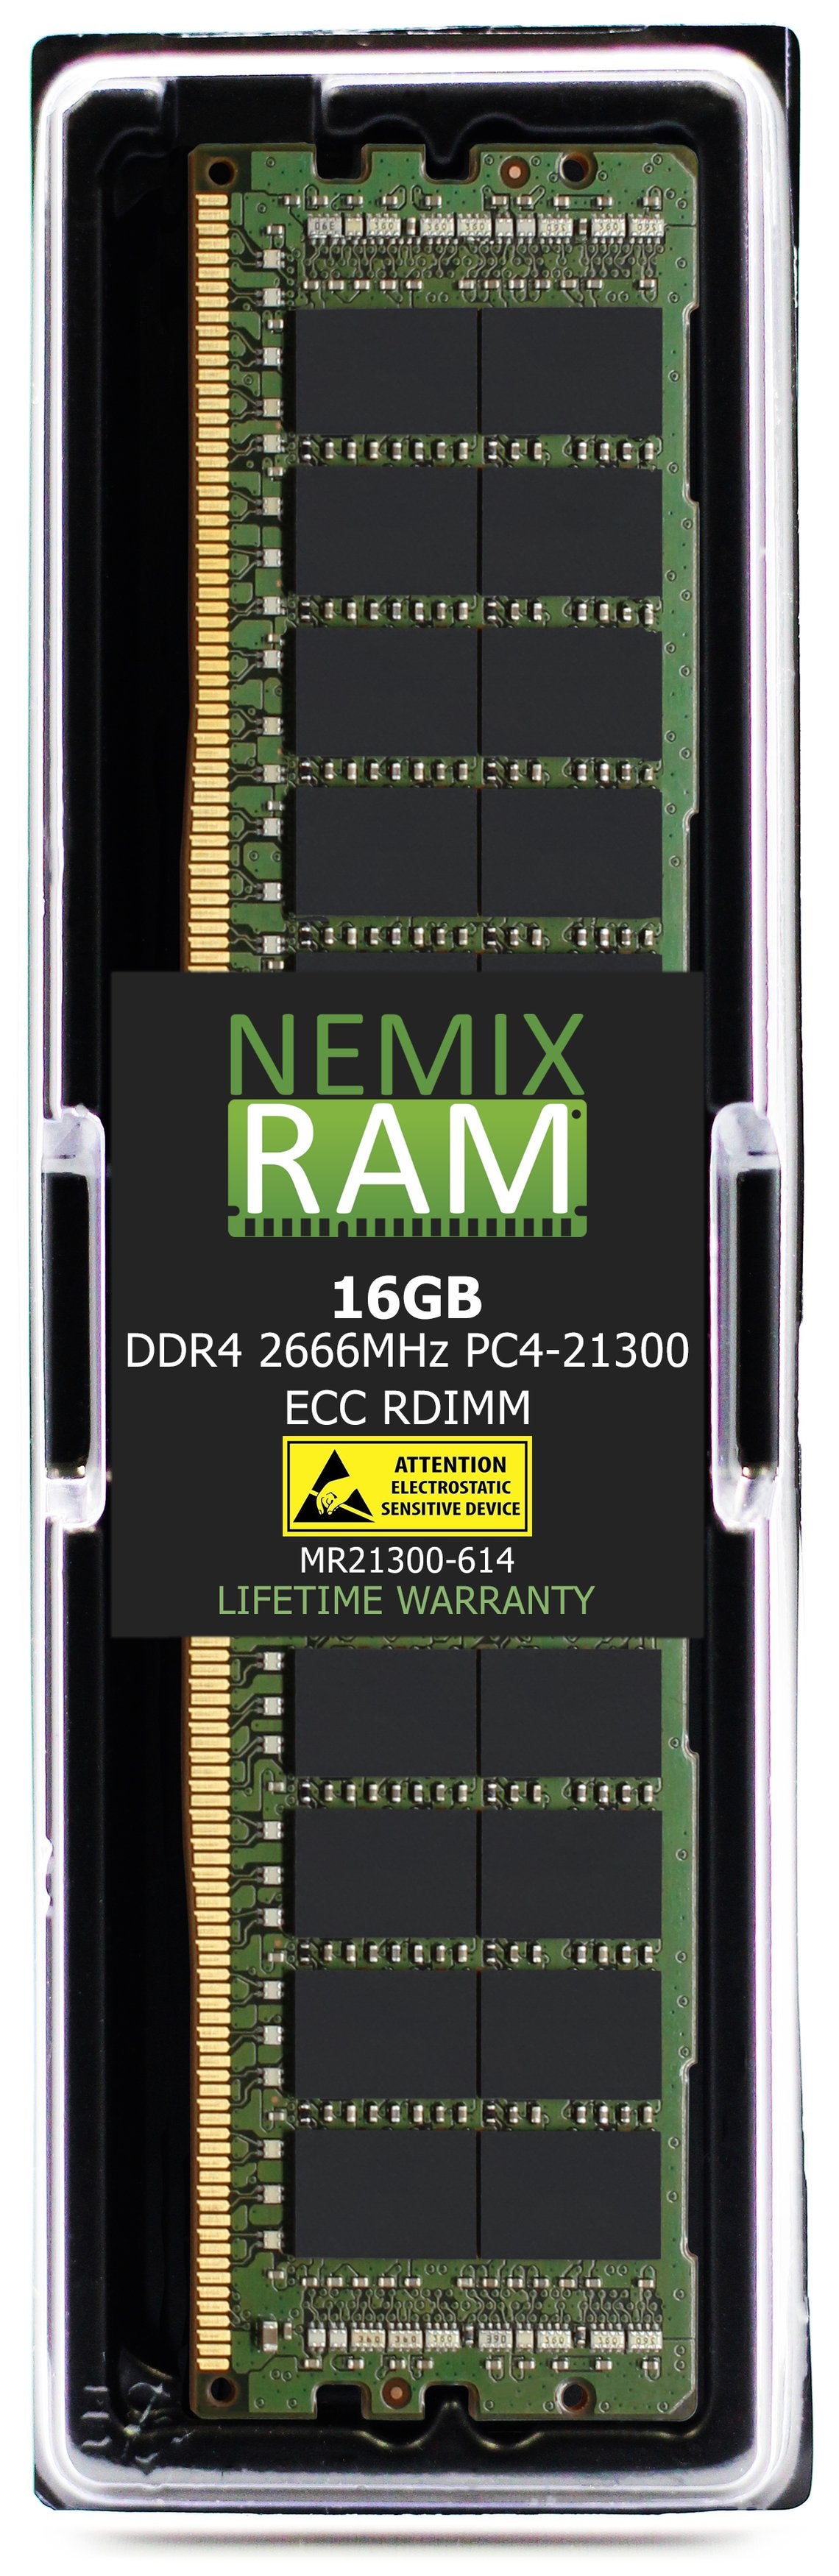 DDR4 2666MHZ PC4-21300 RDIMM Compatible with Synology FlashStation FS3600